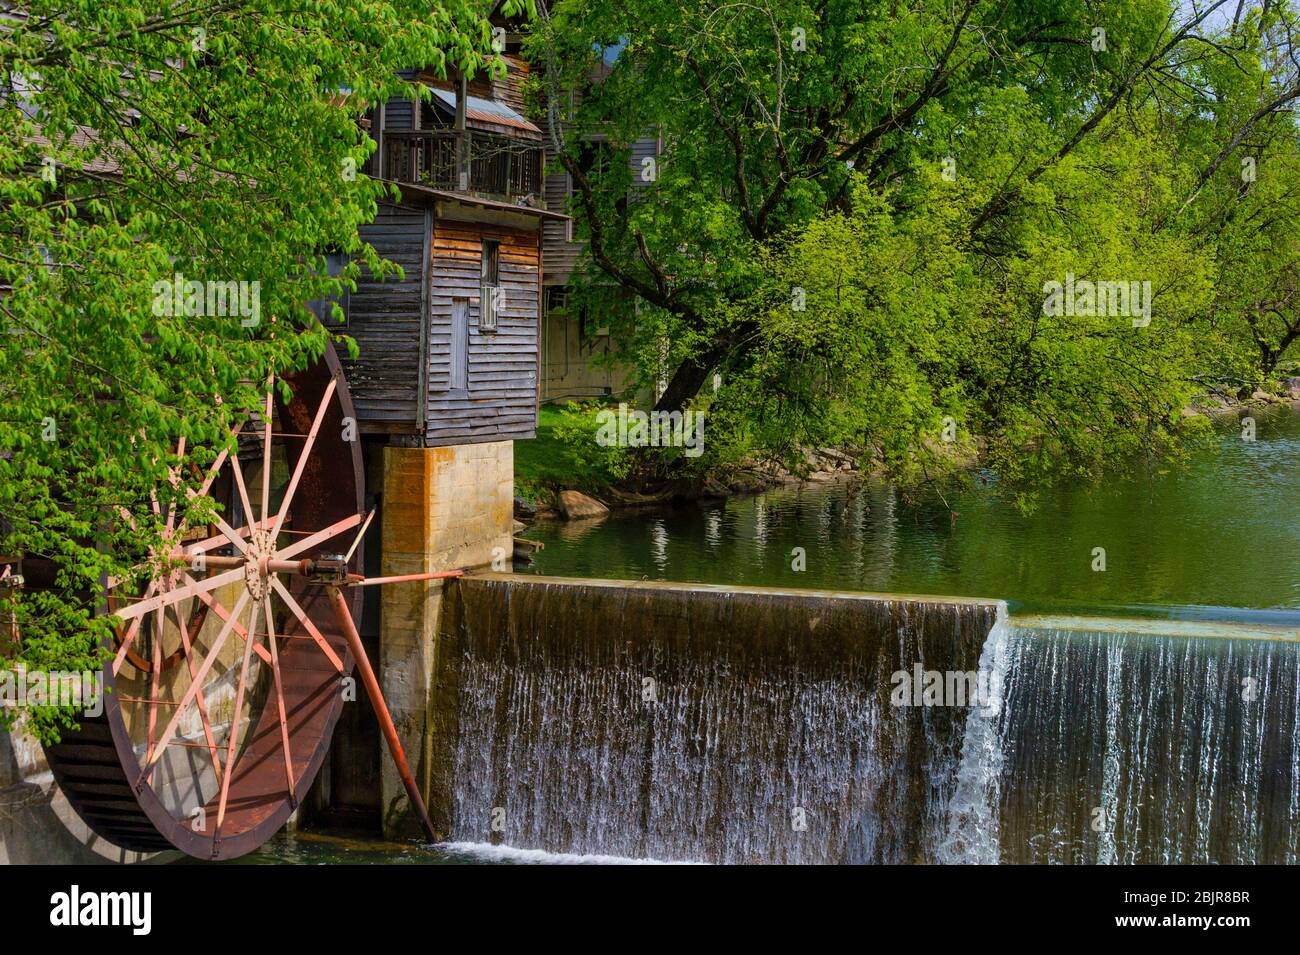 The historical Old Grist Mill, built in 1830 on the banks of the Little Pigeon River, in Pigeon Forge, Tennessee. Stock Photo